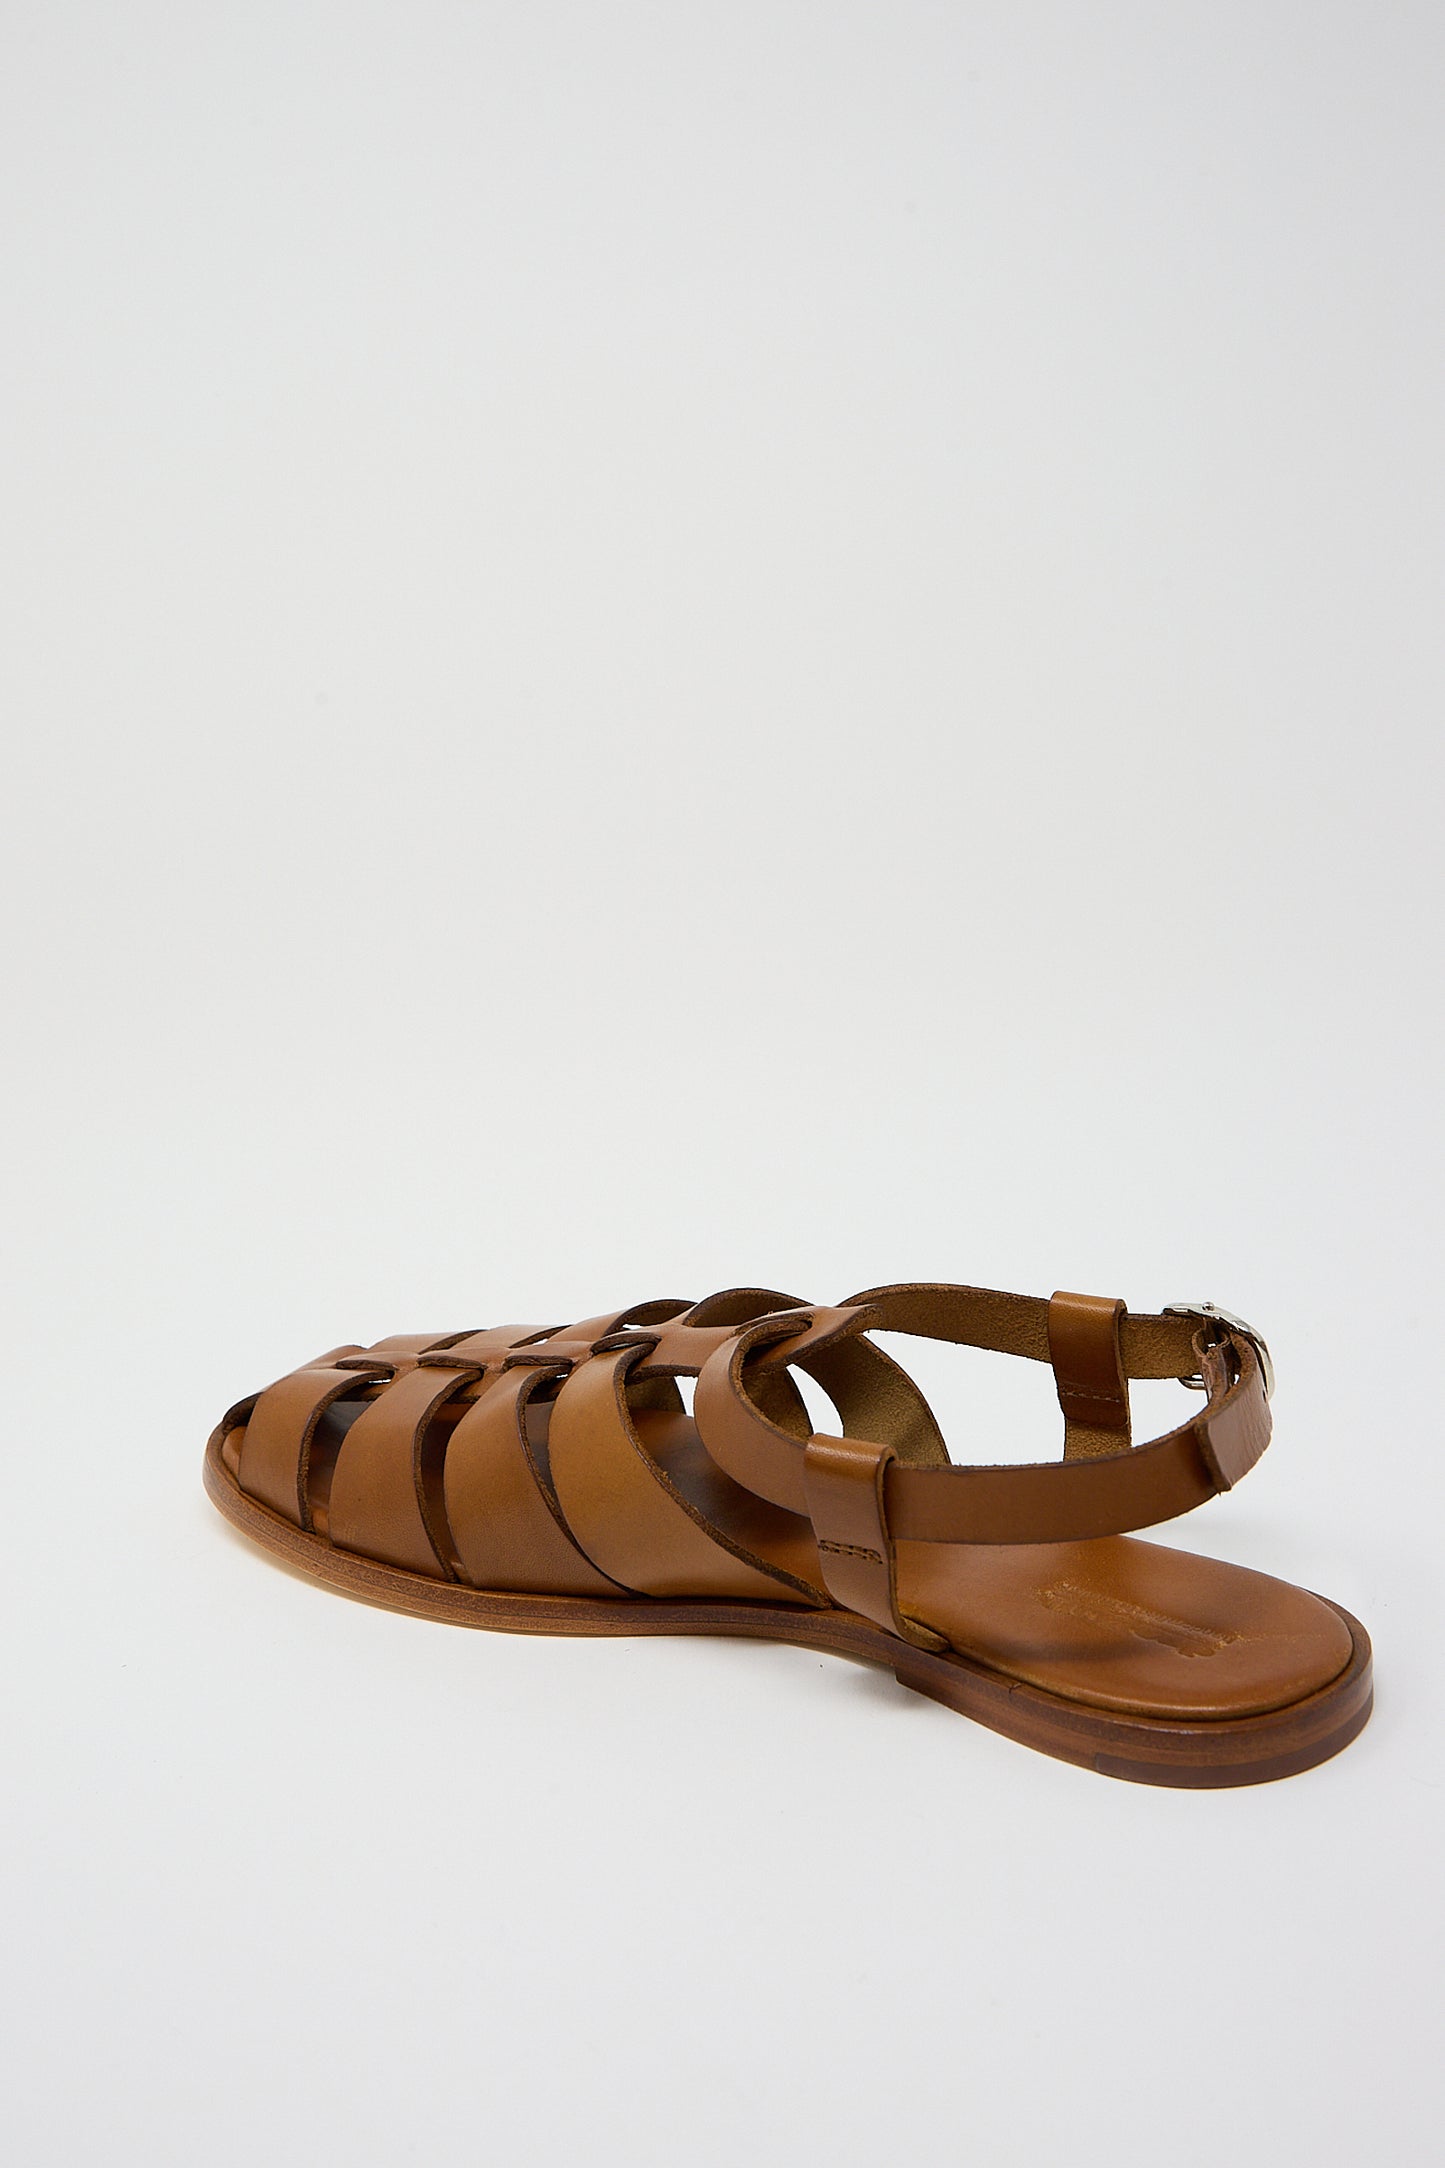 A pair of Dragon Diffusion Pescador Sandals in Tan placed on a white background.